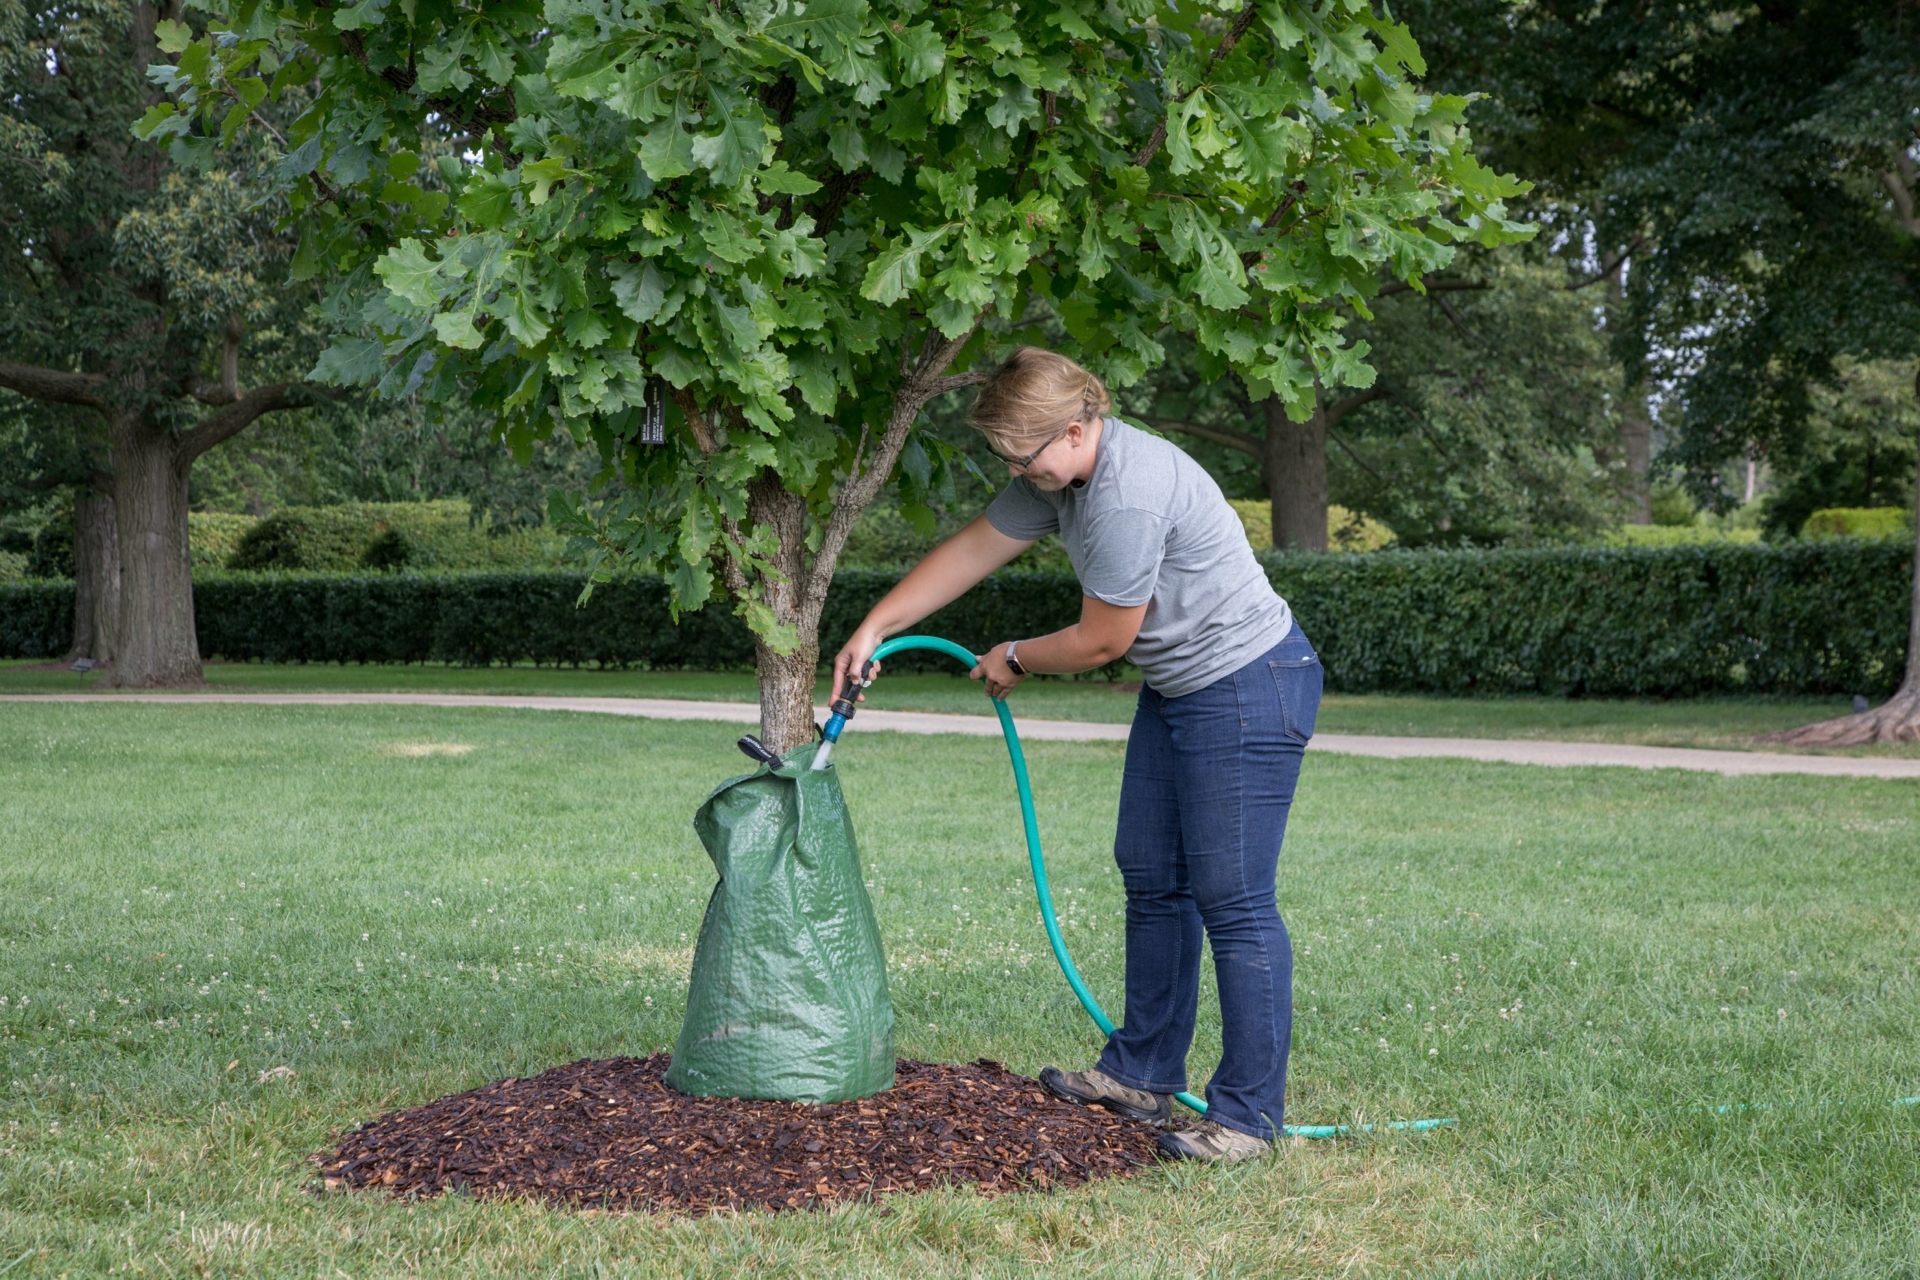 A tree being watered by a water bag.